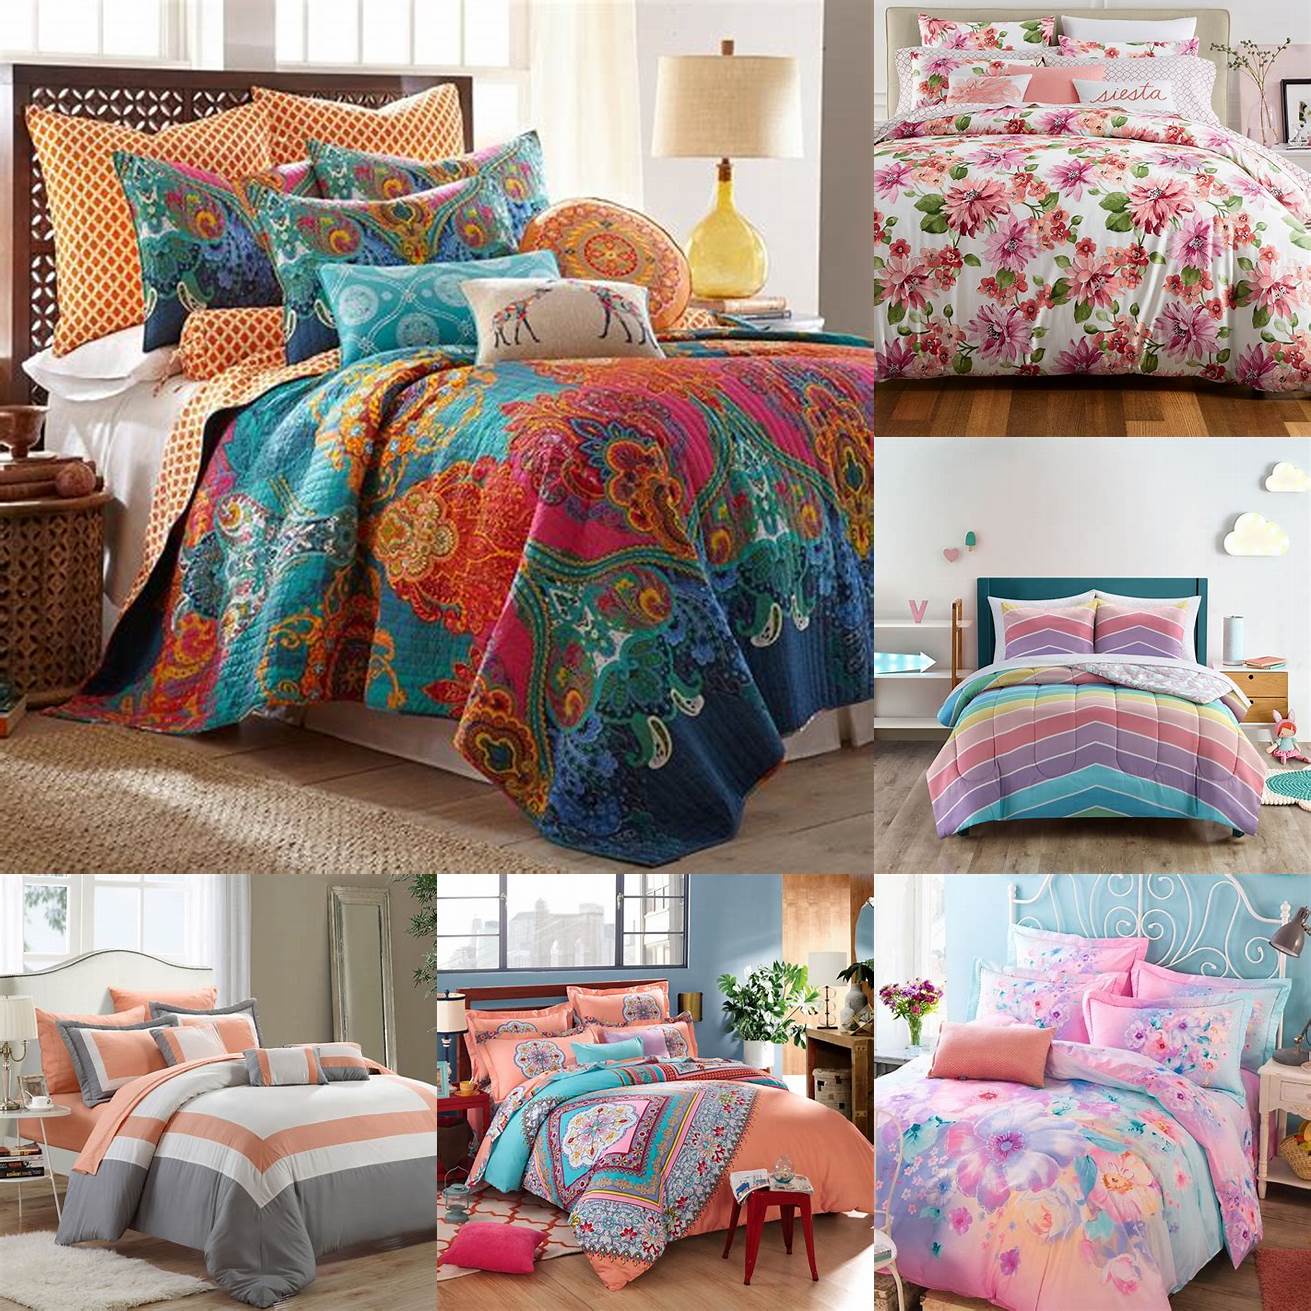 Full-sized bed with colorful bedding